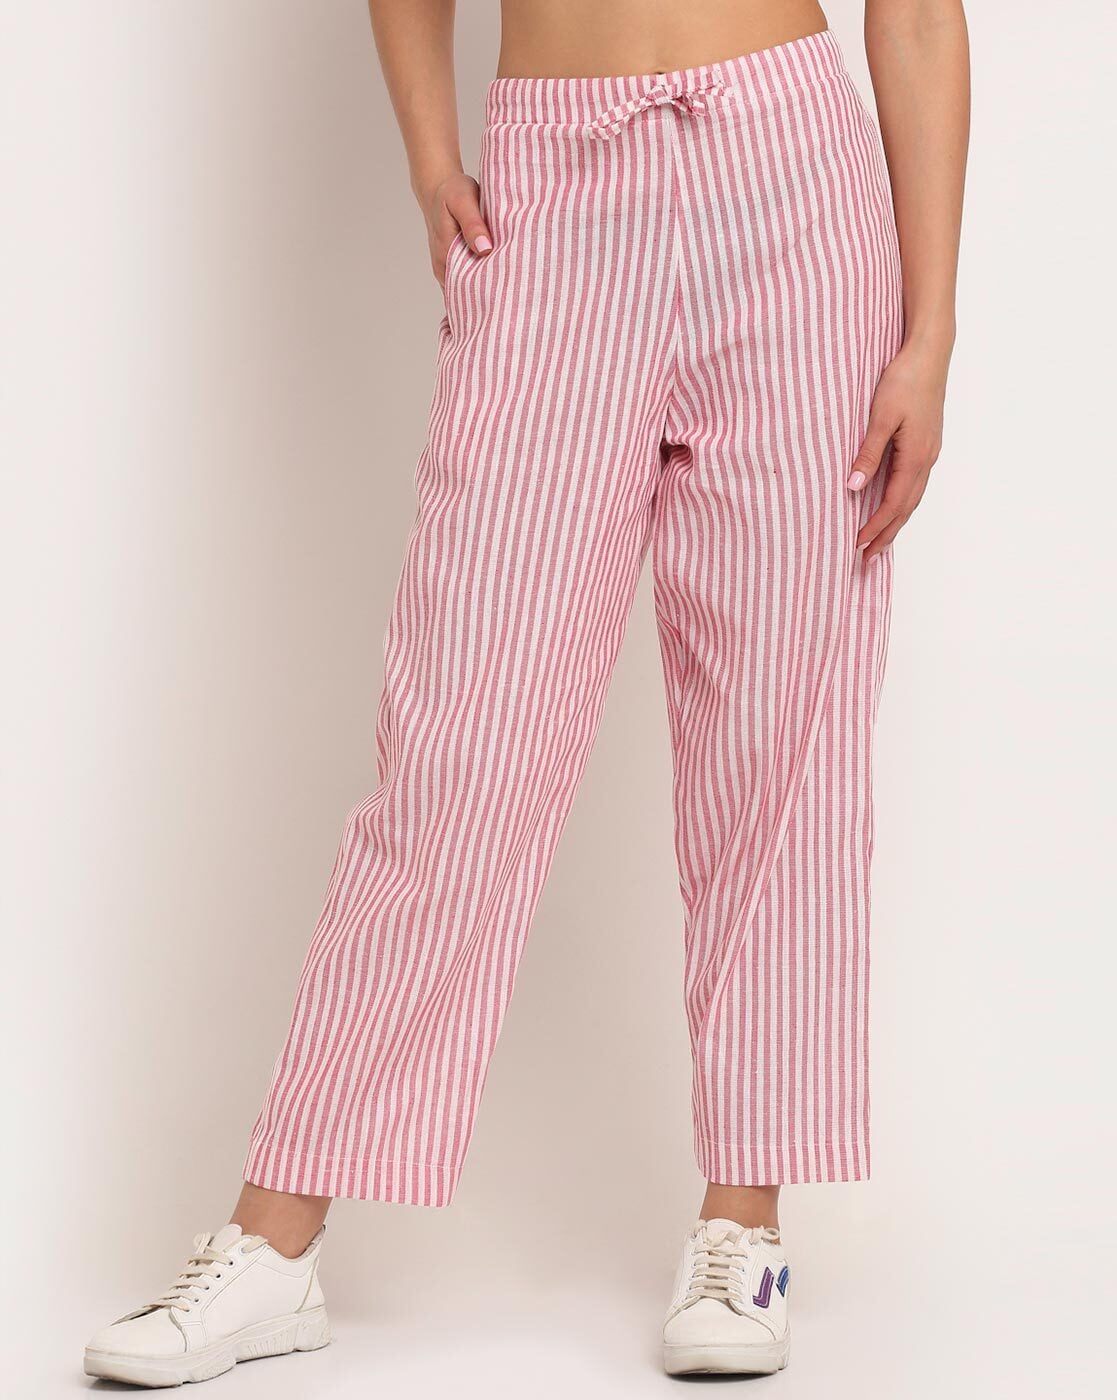 Buy Red  White Polka Flare Pants Online  The Label Life